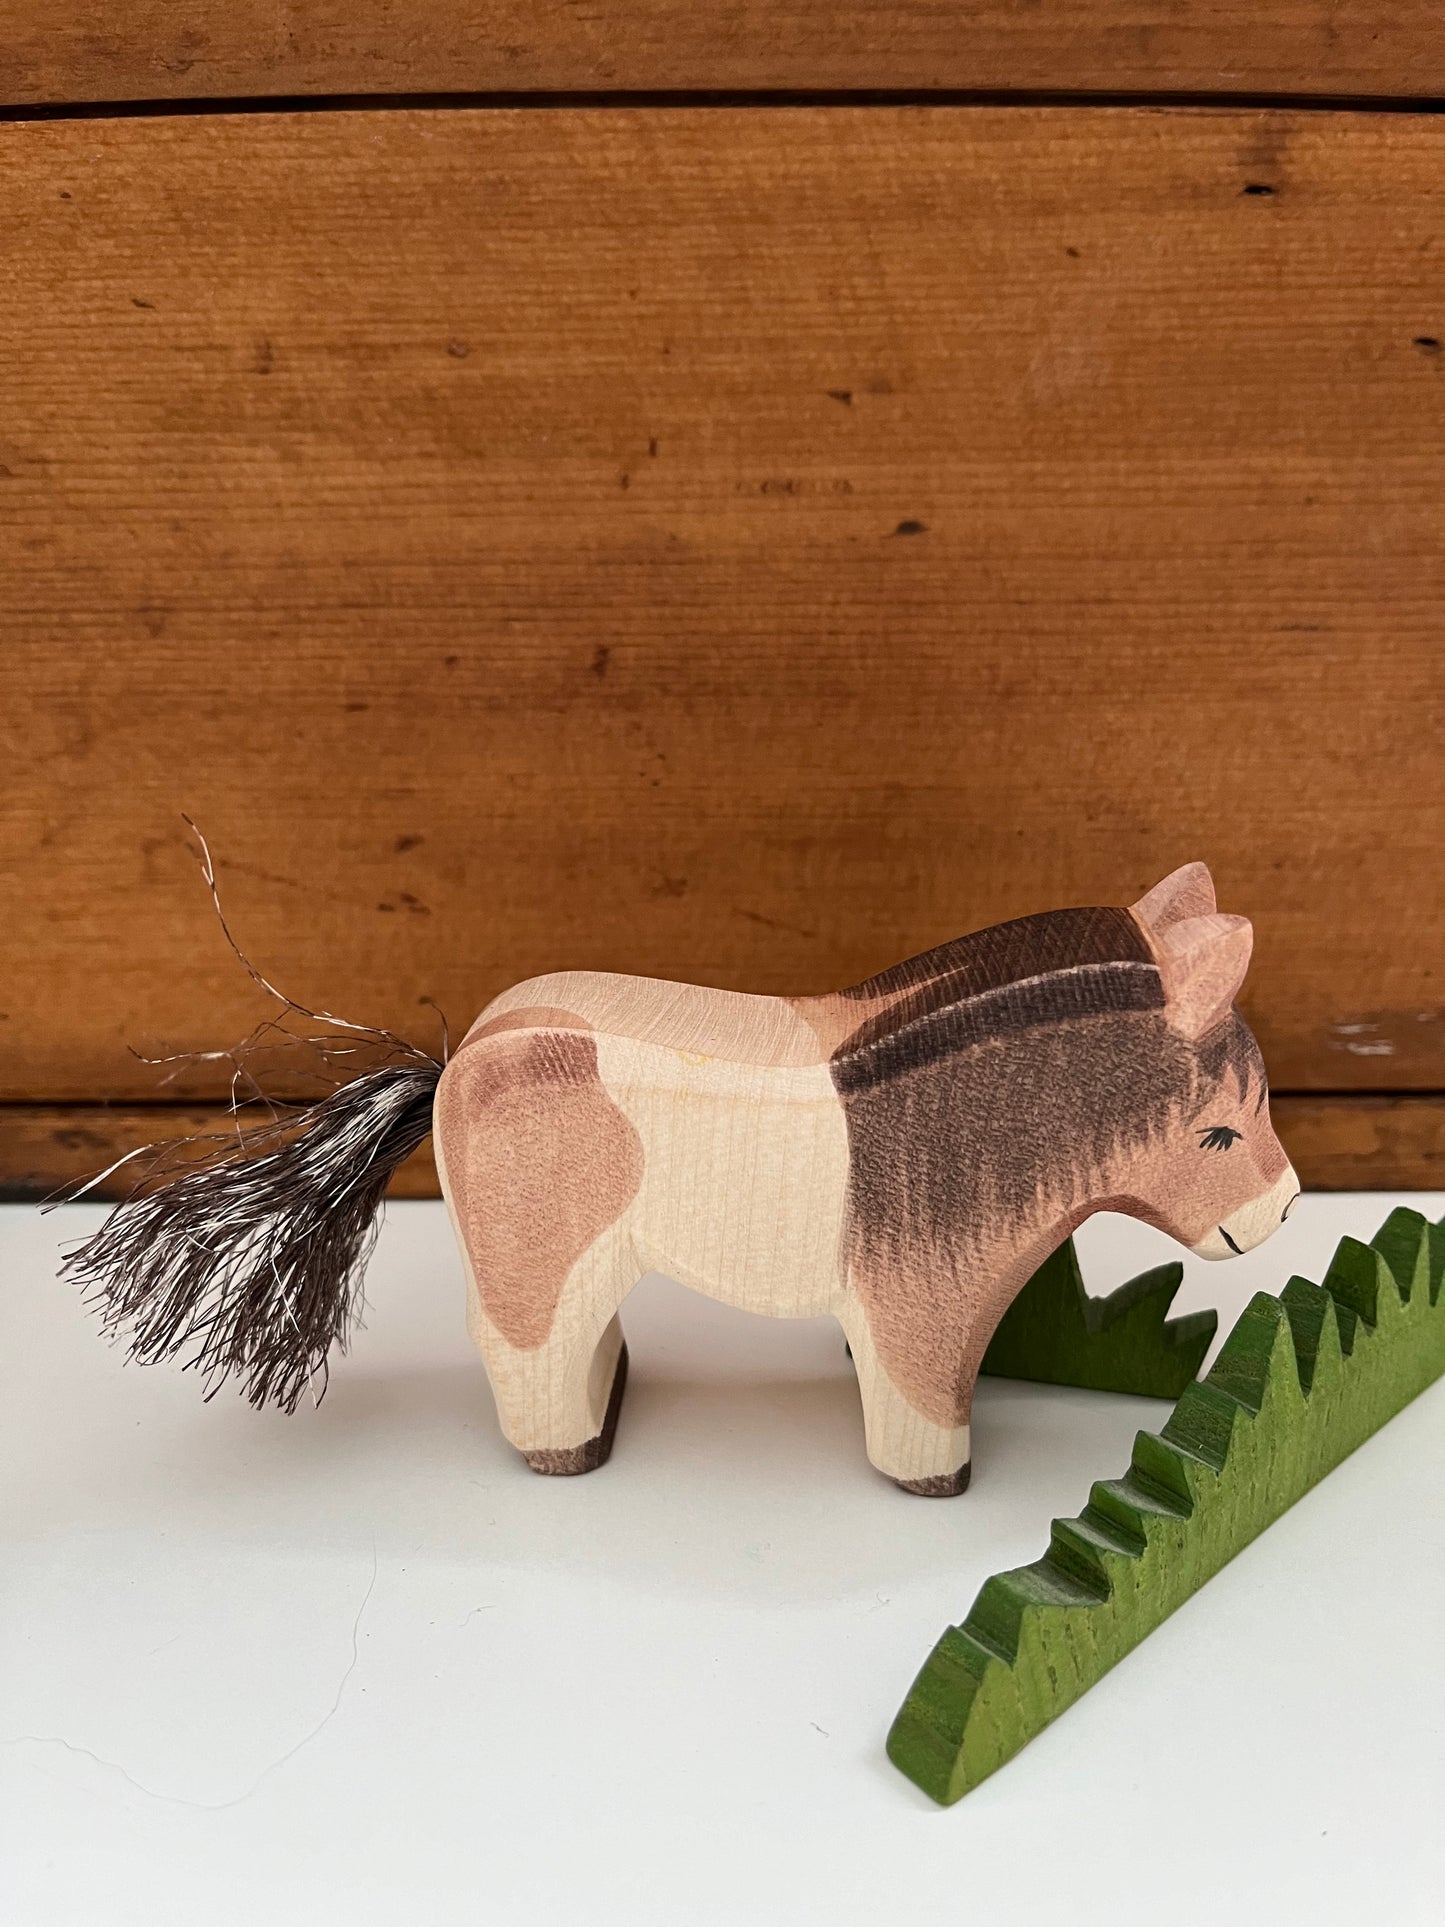 Wooden Dollhouse Play - SHETLAND PONY, Standing, Brown & White